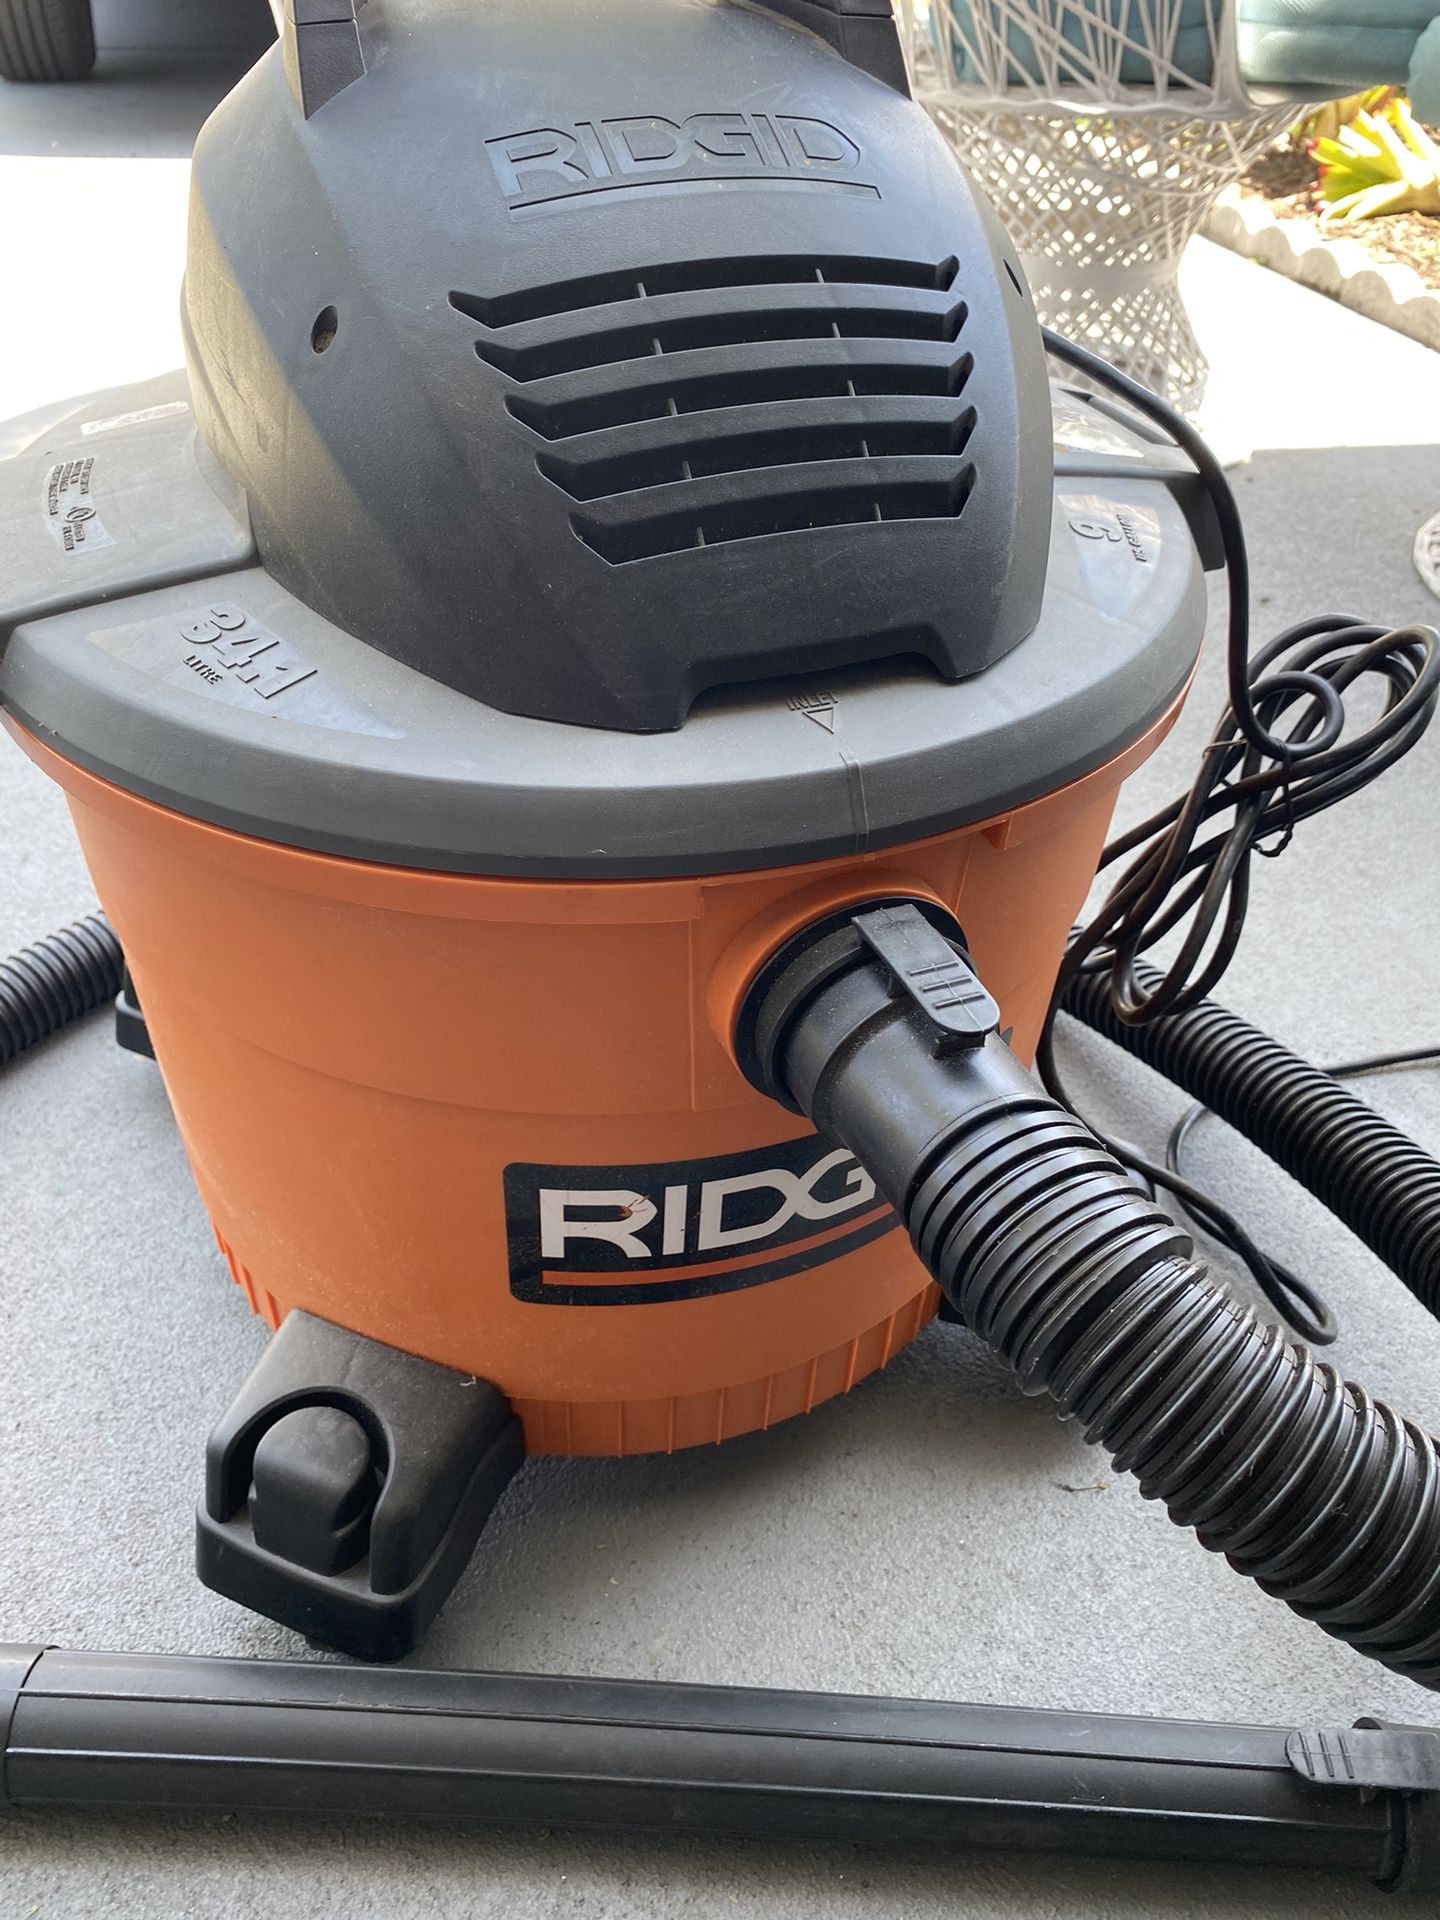 RIDGID 9 Gallon Wet/Dry Shop Vacuum with Filter Locking Hose and Accessories